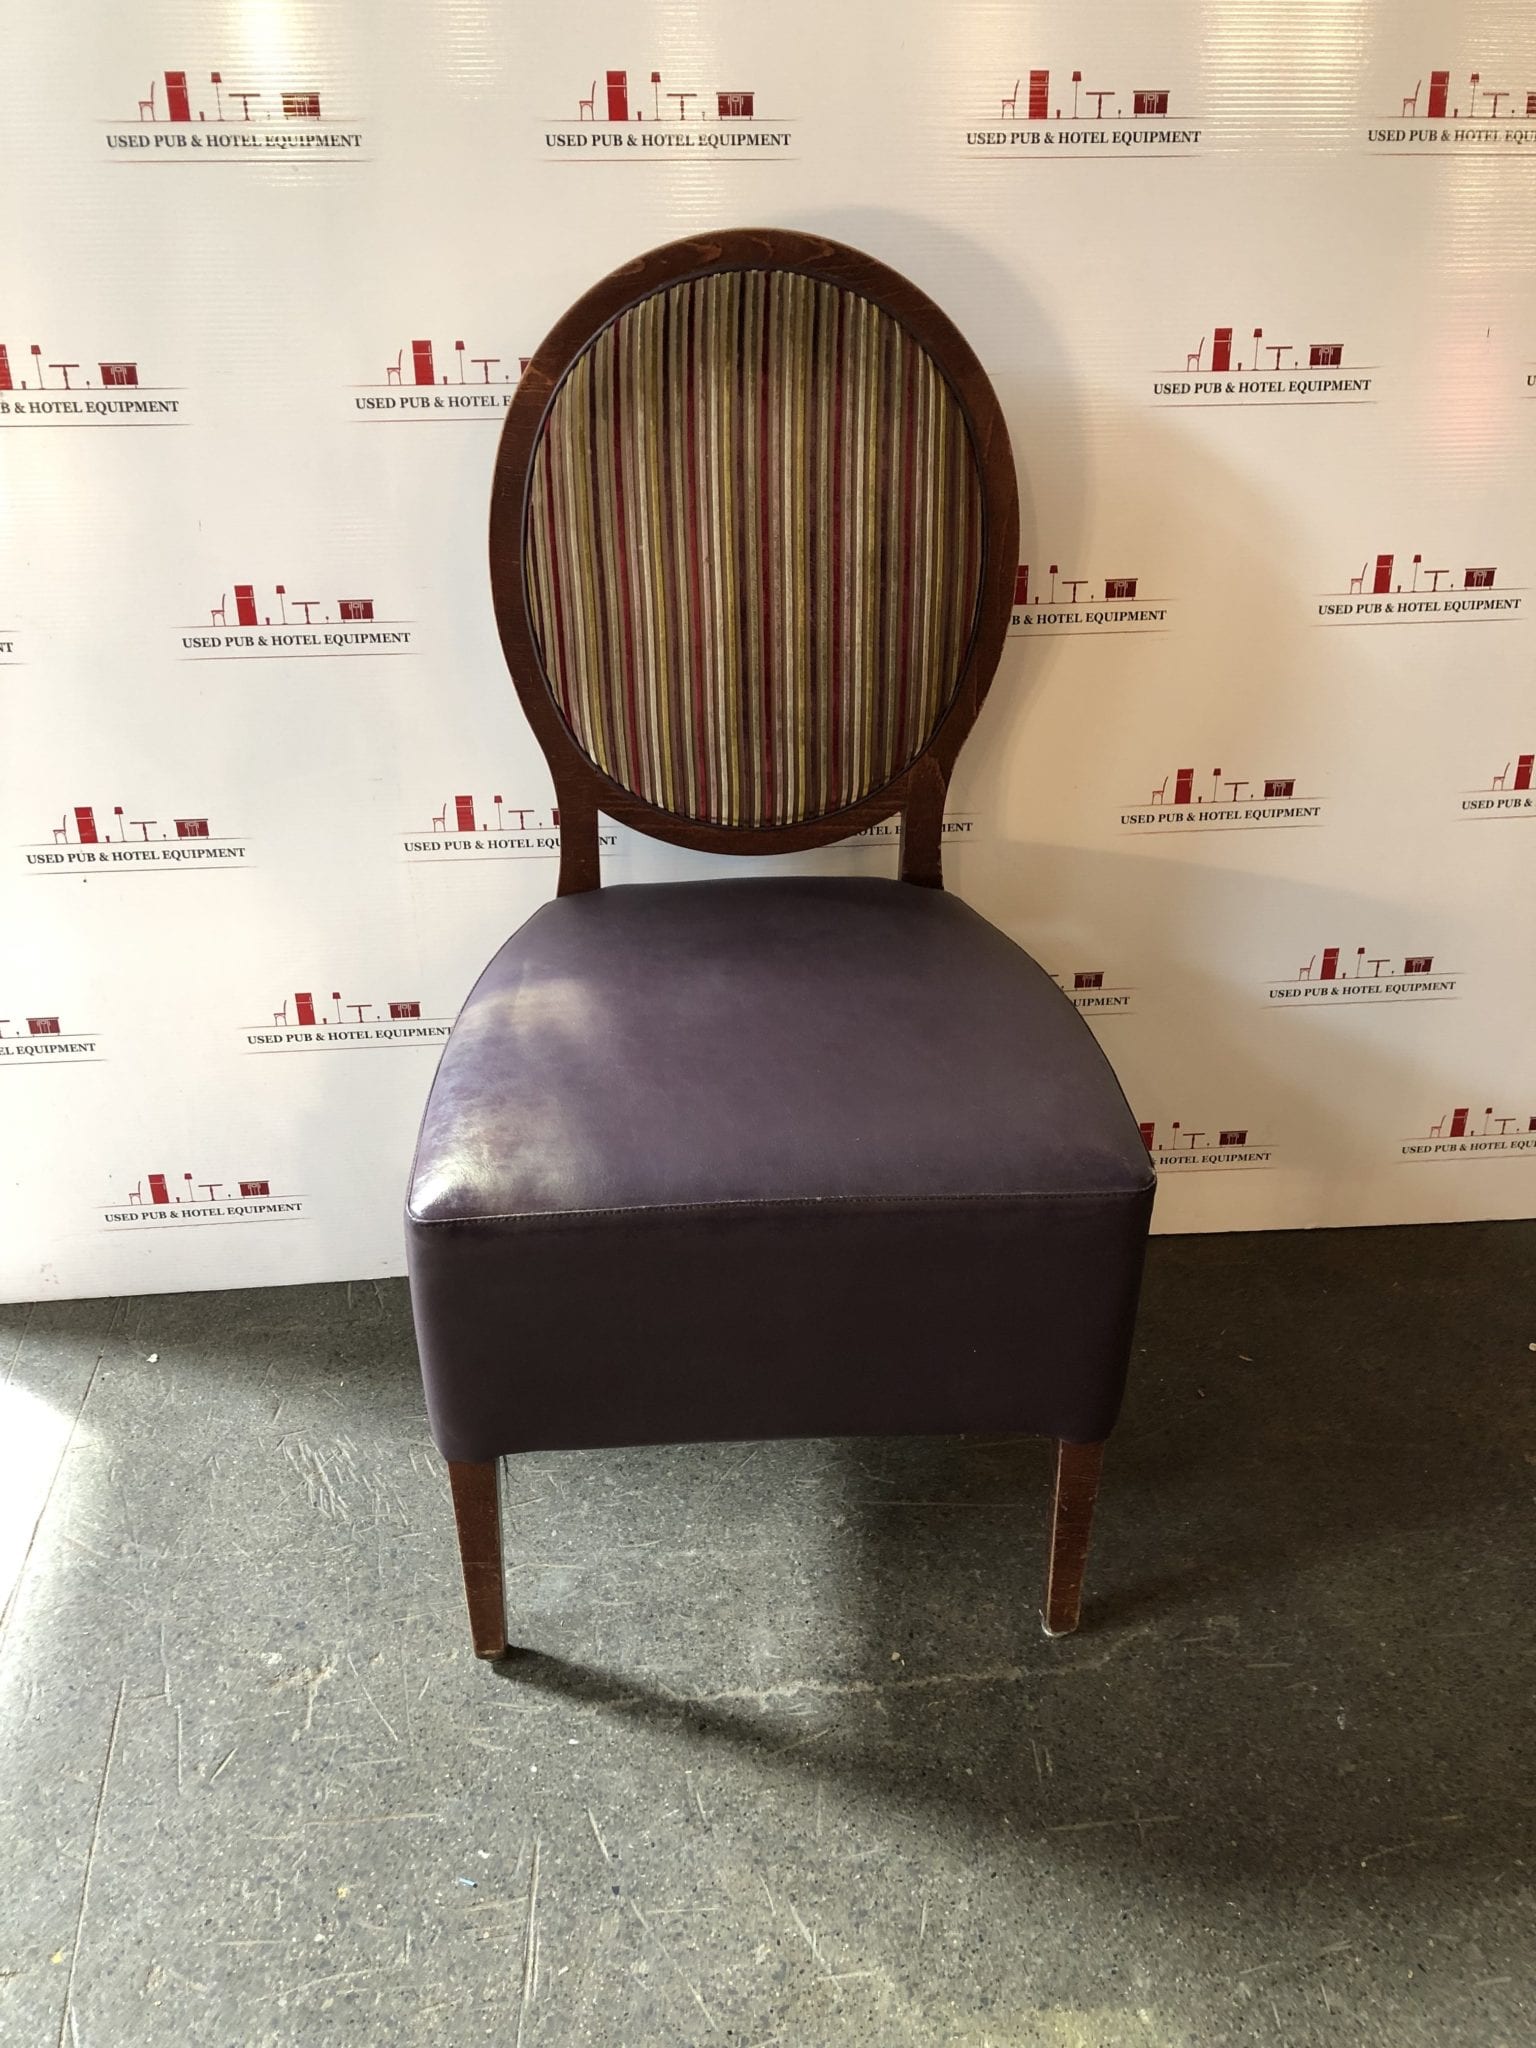 Purple Leather Striped Cloth Dining Chair Used Pub And Hotel Equipment